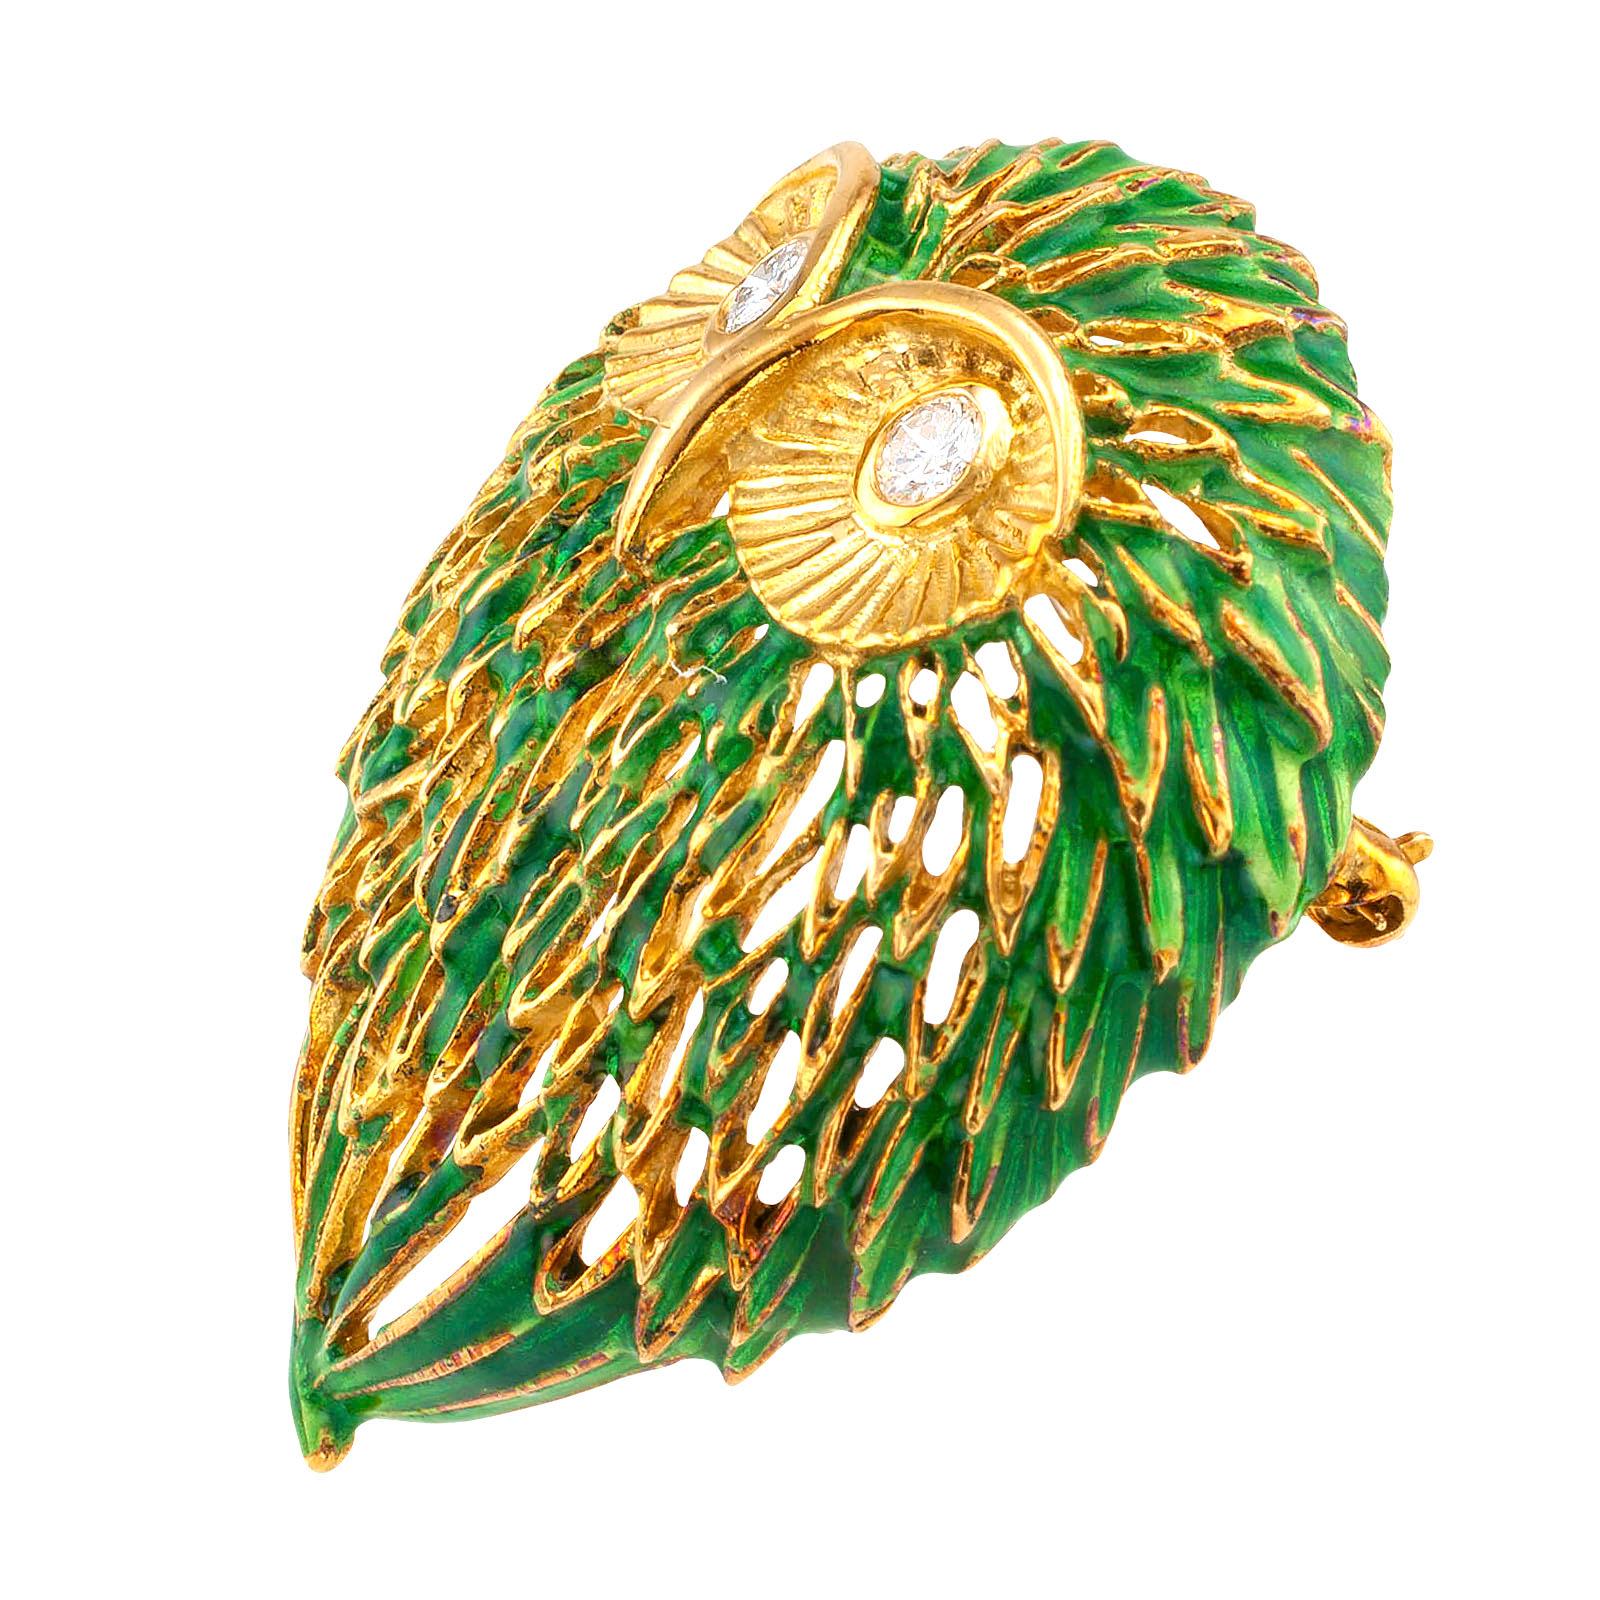 Enamel and diamond  gold Owl brooch circa 1970.

DETAILS:
DIAMONDS: two round brilliant-cut diamonds totaling approximately 0.25 carat, approximately G color, VS clarity.
METAL: 18-karat yellow gold with green enamel.
MEASUREMENTS: approximately